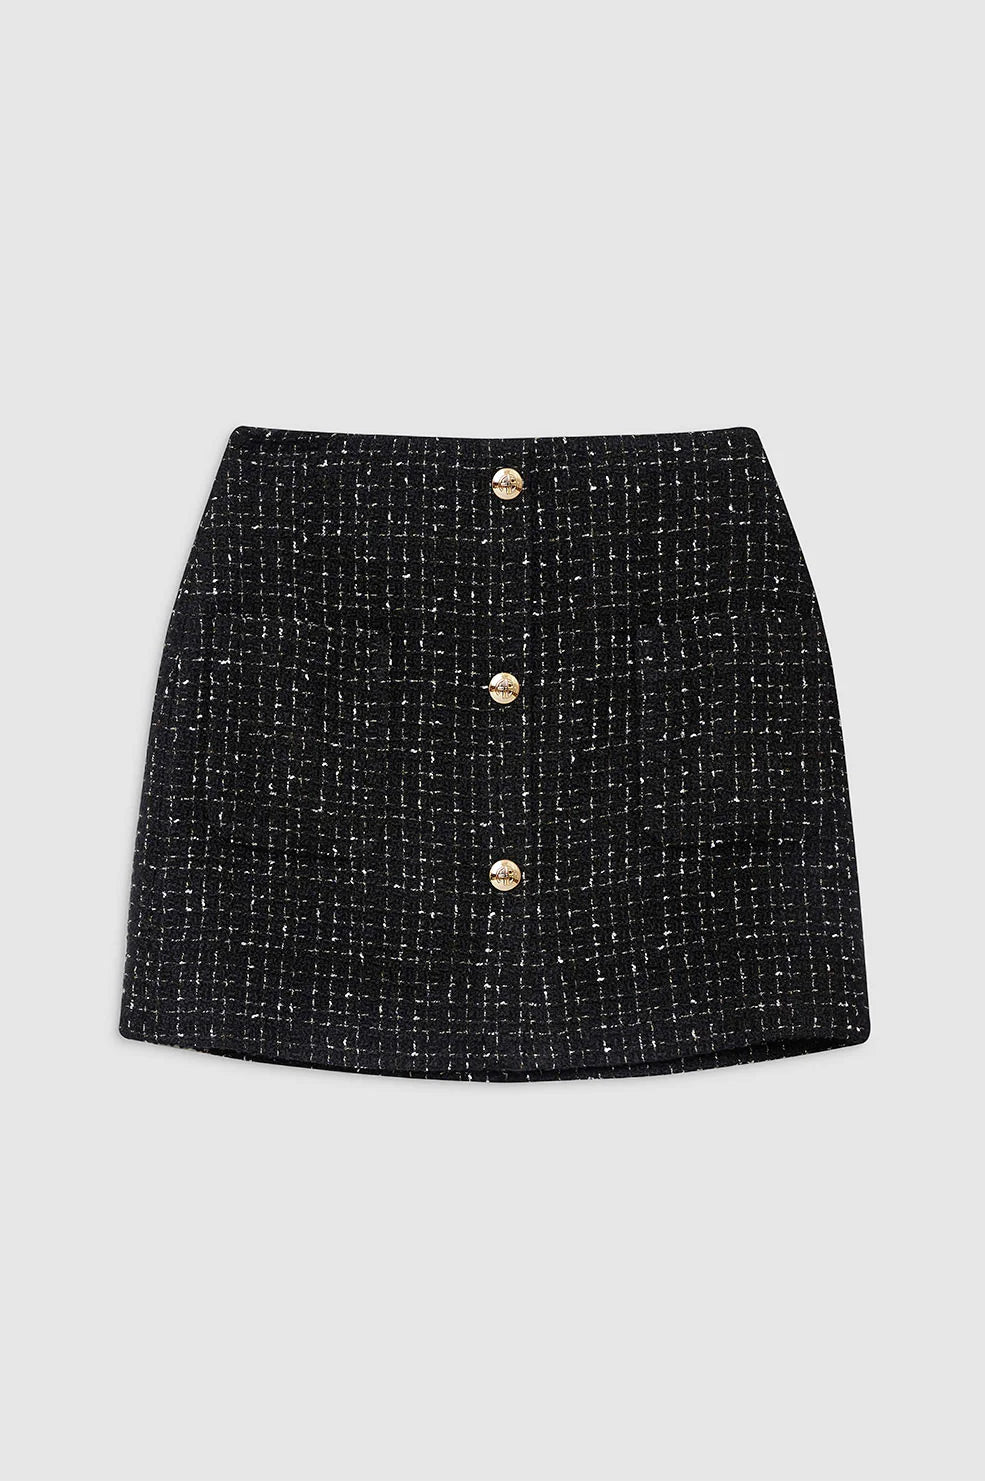 Mateo Skirt in Black and White Tweed